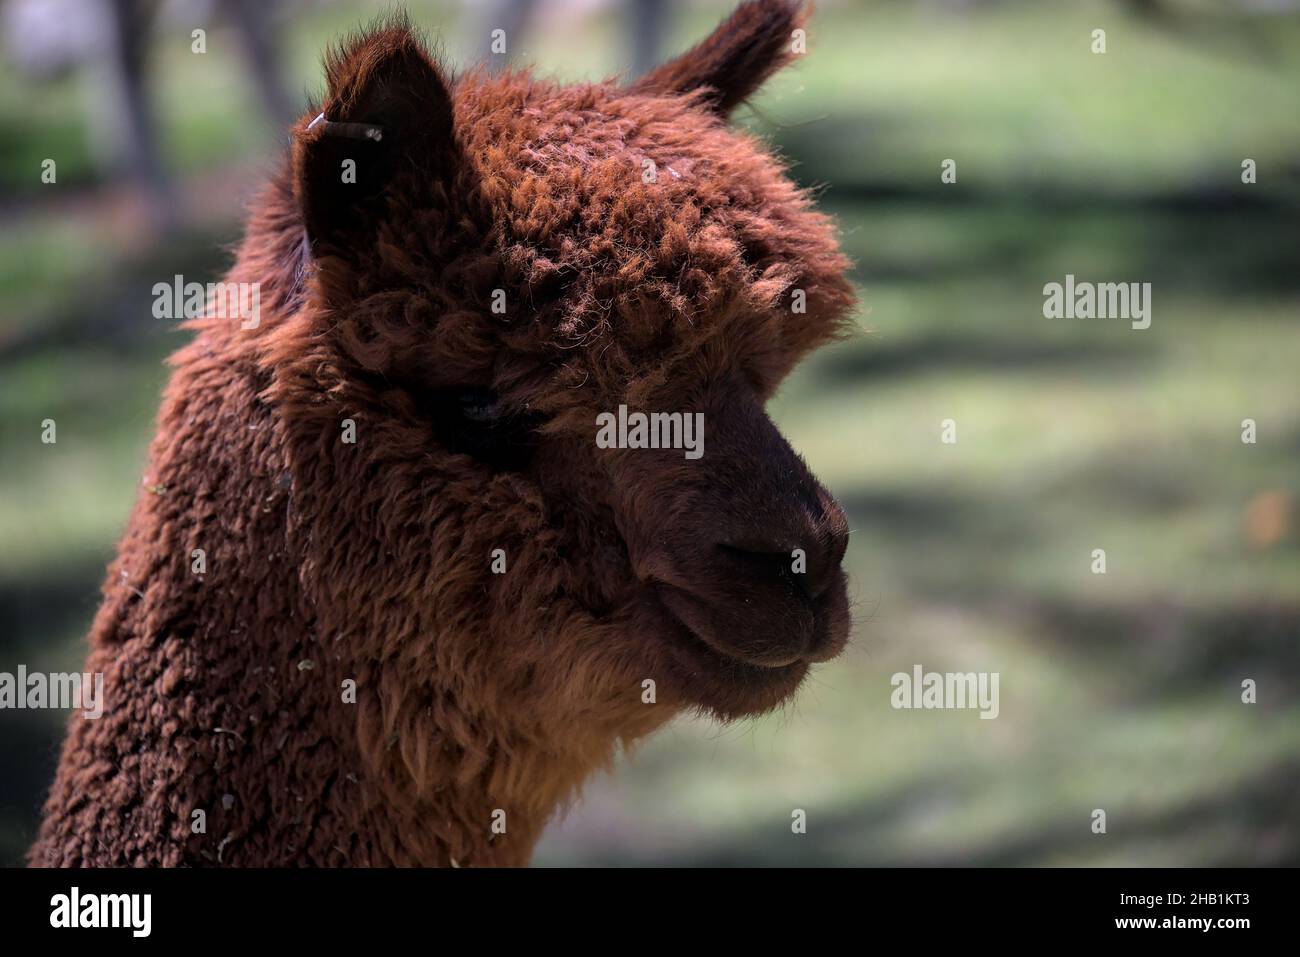 Alpaca llama head chewing grass at wool factory farm in south america peru tourists visit to observe traditional andean people textile manufacturing p Stock Photo